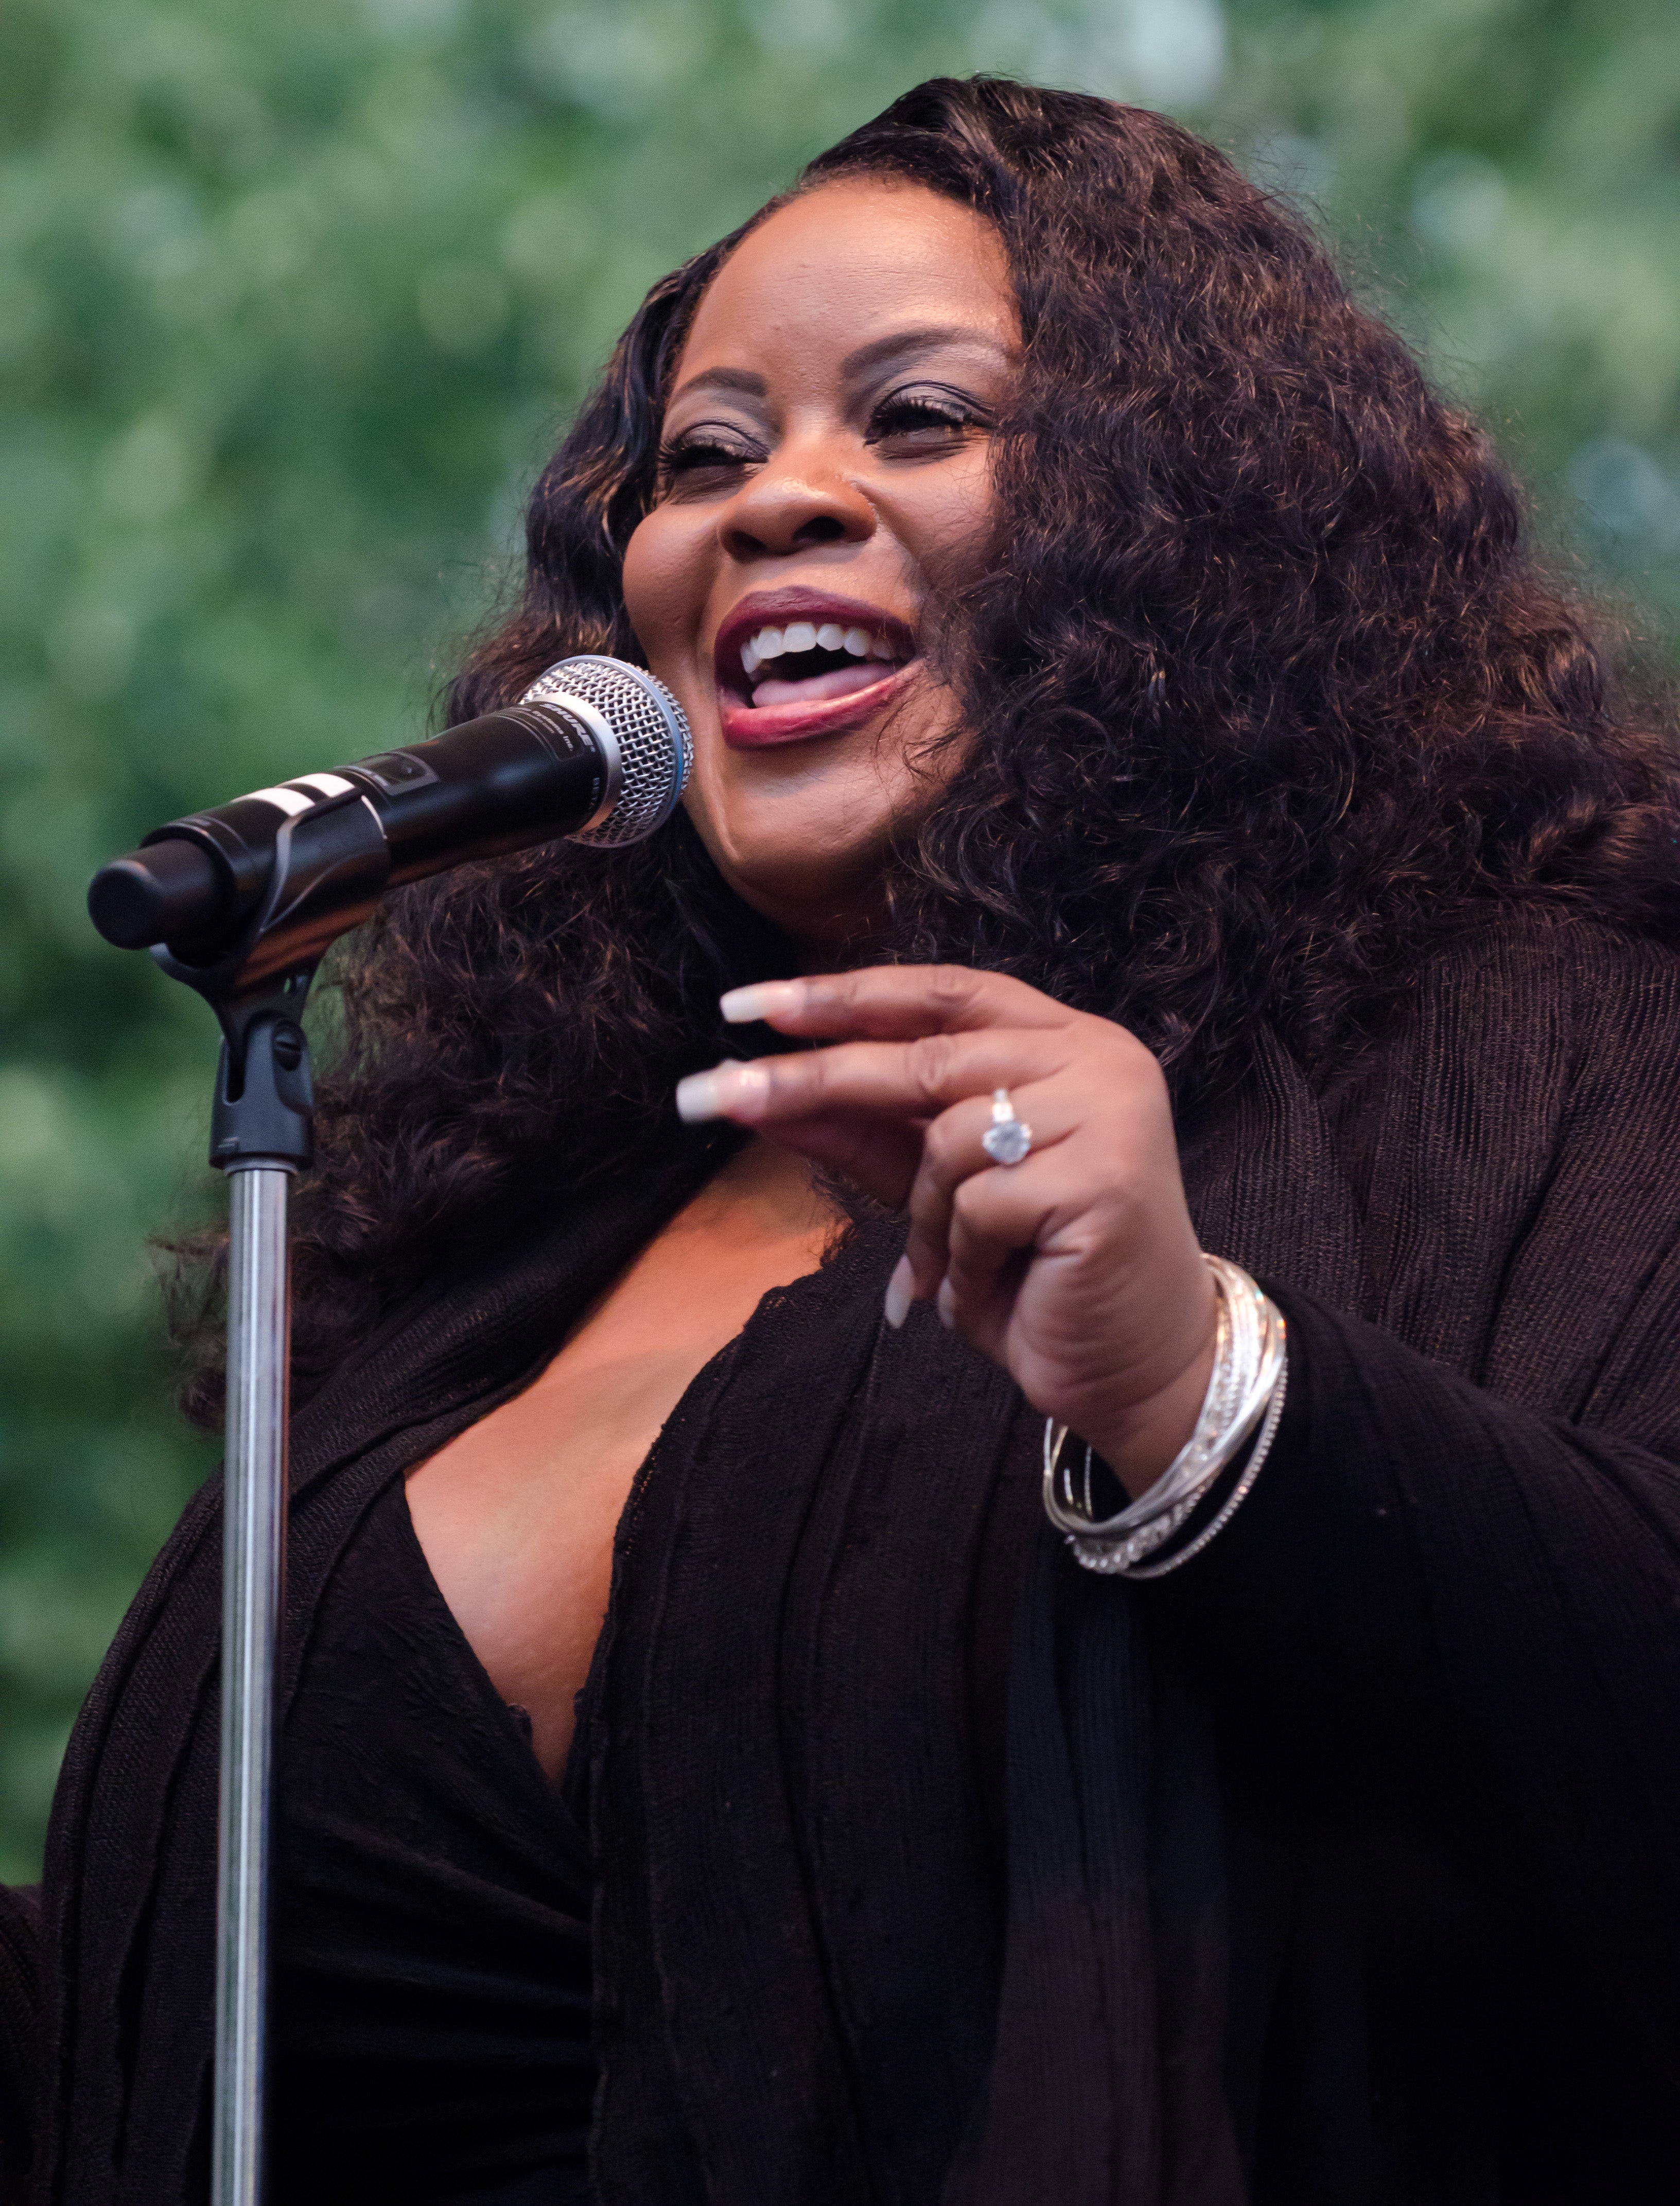 5 Questions with Maysa on ‘Motion of Love’ & Working with Stevie Wonder